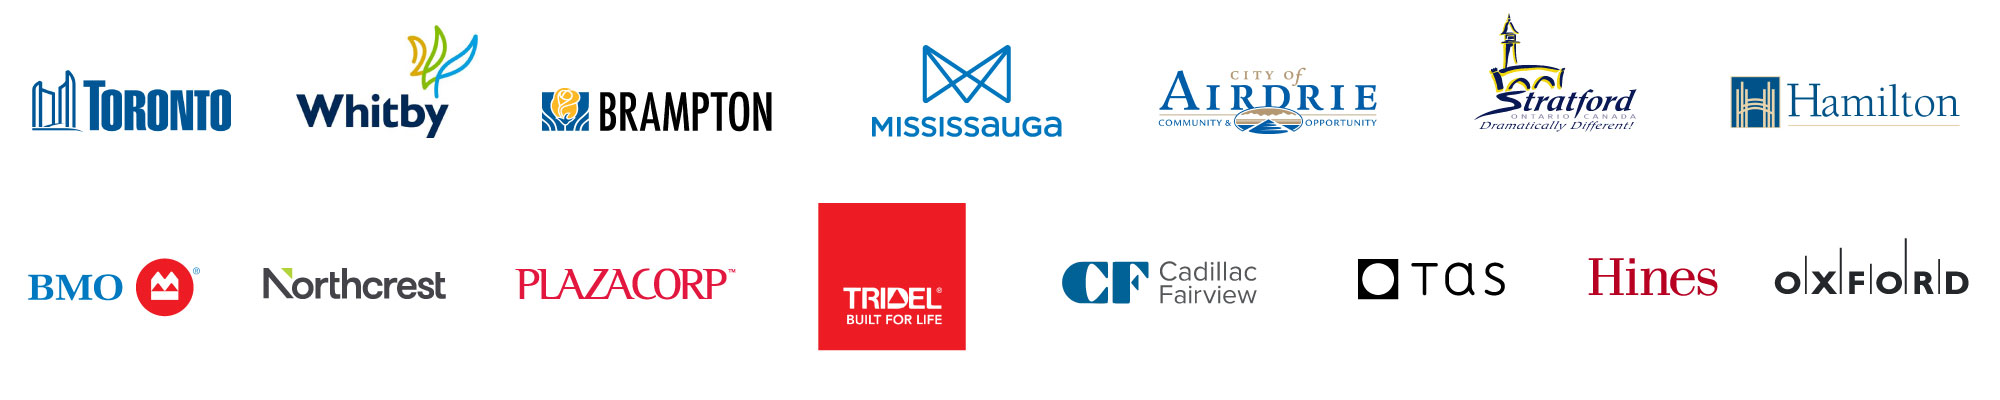 Two rows of logos (City of Toronto, Town of Whitby, City of Brampton, City of Mississauga, City of Airdrie, City of Stratford, City of Hamilton, BMO, Northcrest, Plazacorp, Tridel, Cadillac Fairview, TAS, Hines, Oxford)